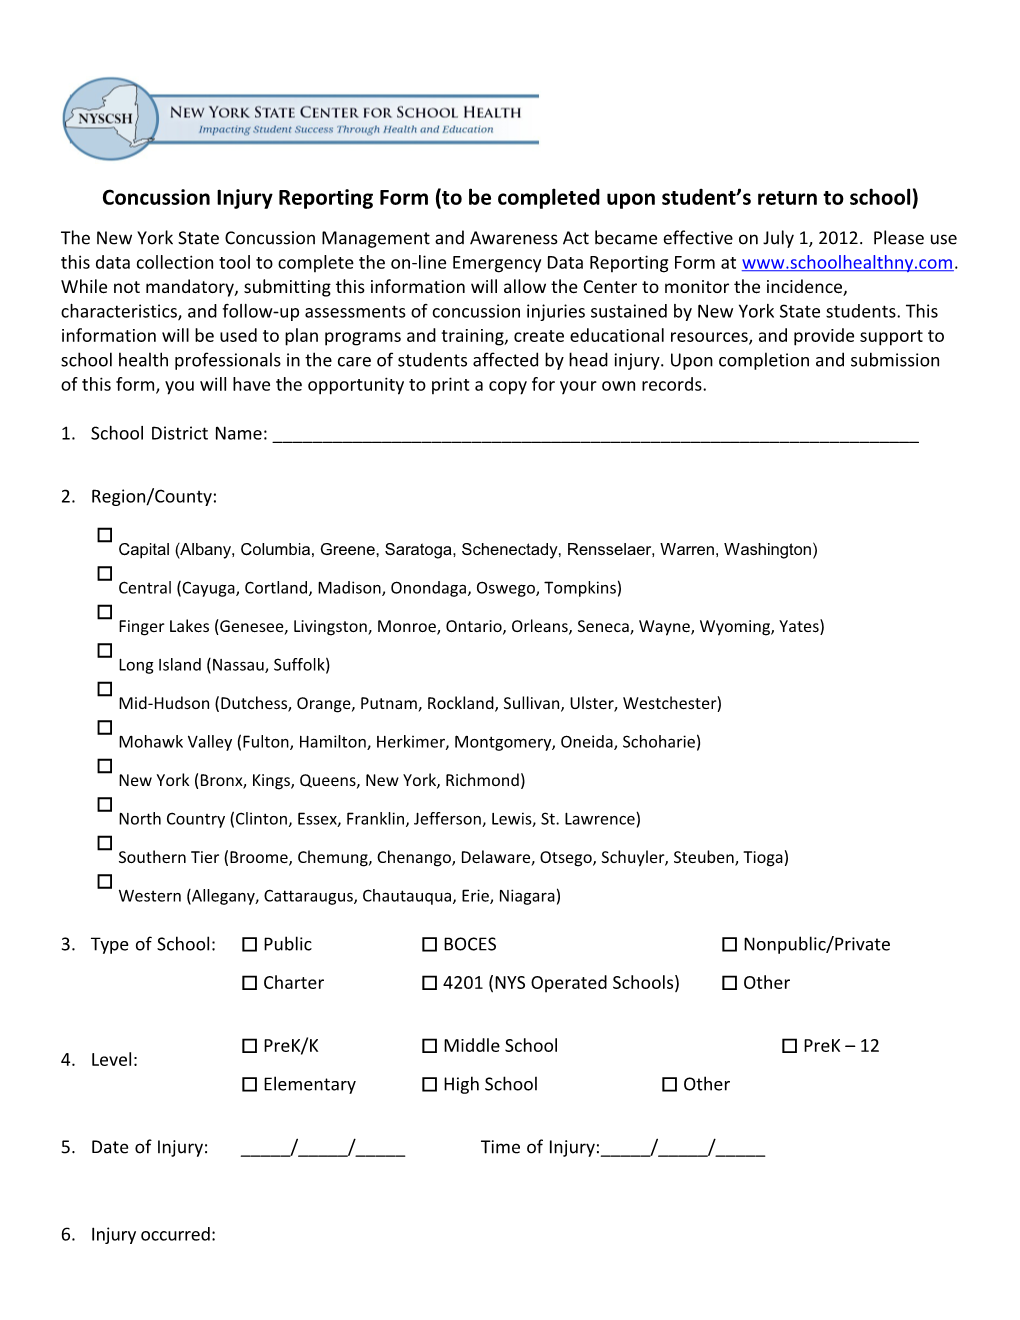 Concussion Injury Reporting Form (To Be Completed Upon Student S Return to School)